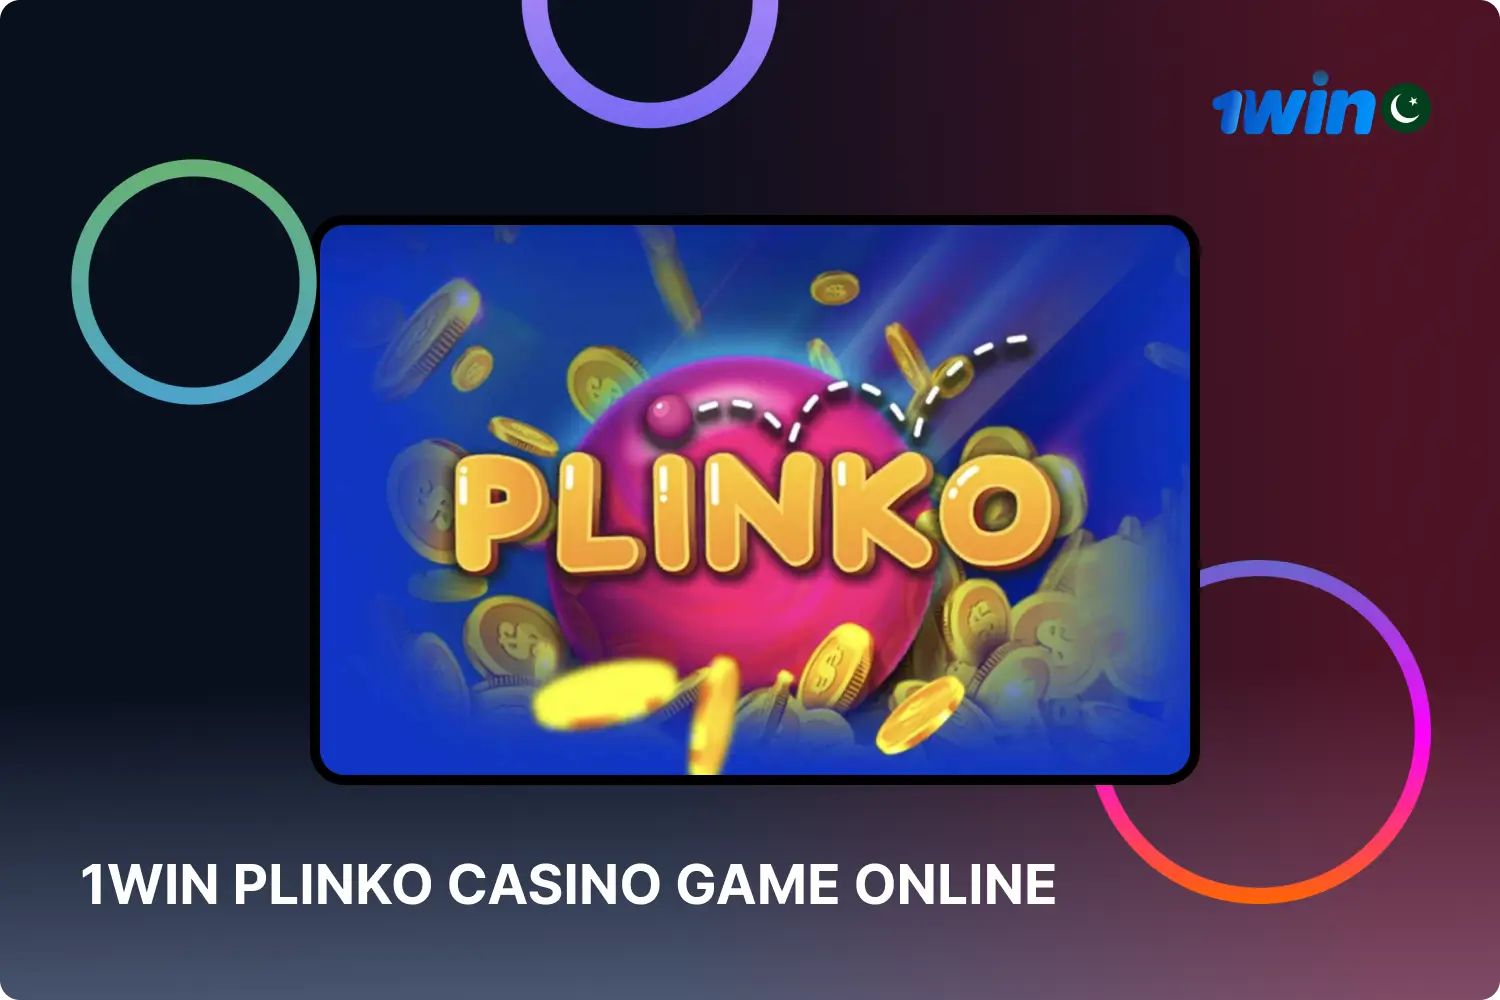 The popular online game Plinko for real money and in demo mode is available to Pakistani players on 1win's website and mobile app